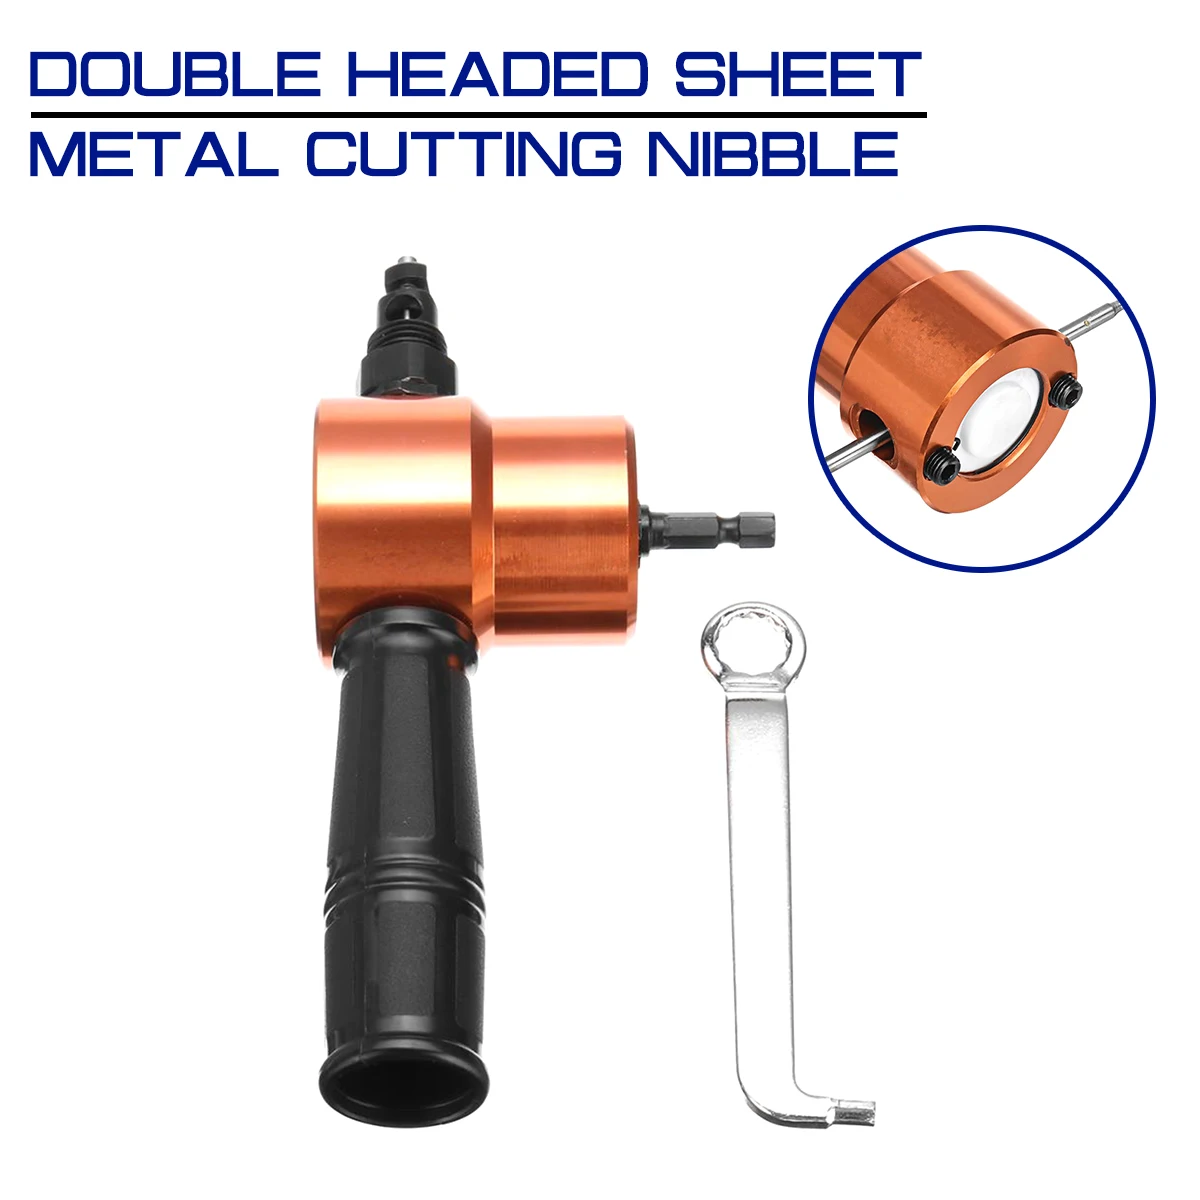 

Double Headed Sheet Metal Cutting Nibbler Metal Saw Cutter with 360 Degree Adjustable Drill Attachment Extra Punch Cutting Tools